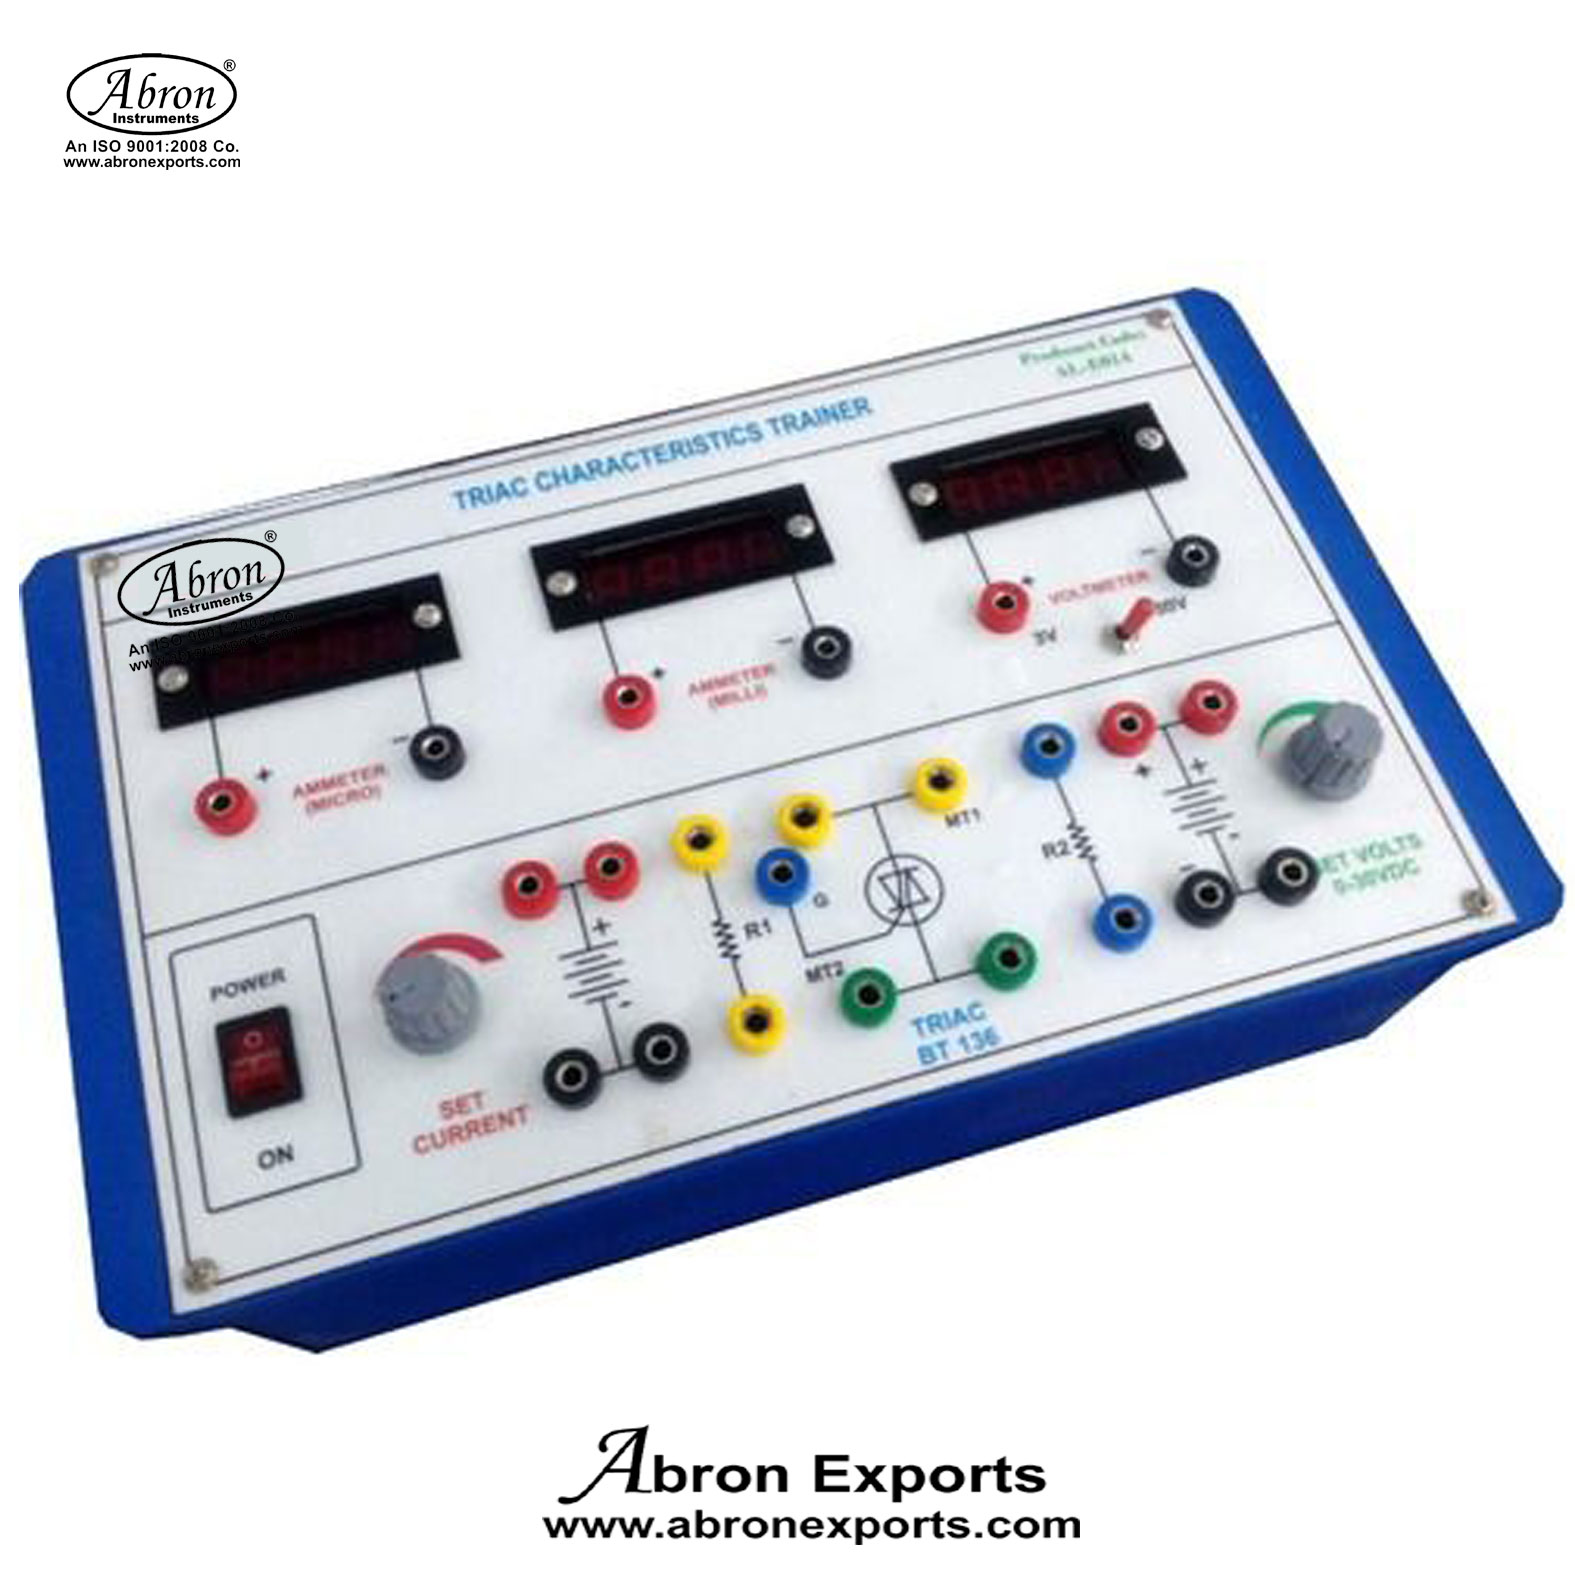 Triac Characteristics Trainer With 3digital meters Trainer Circuit Board With power supply Abron AE-1437Dd